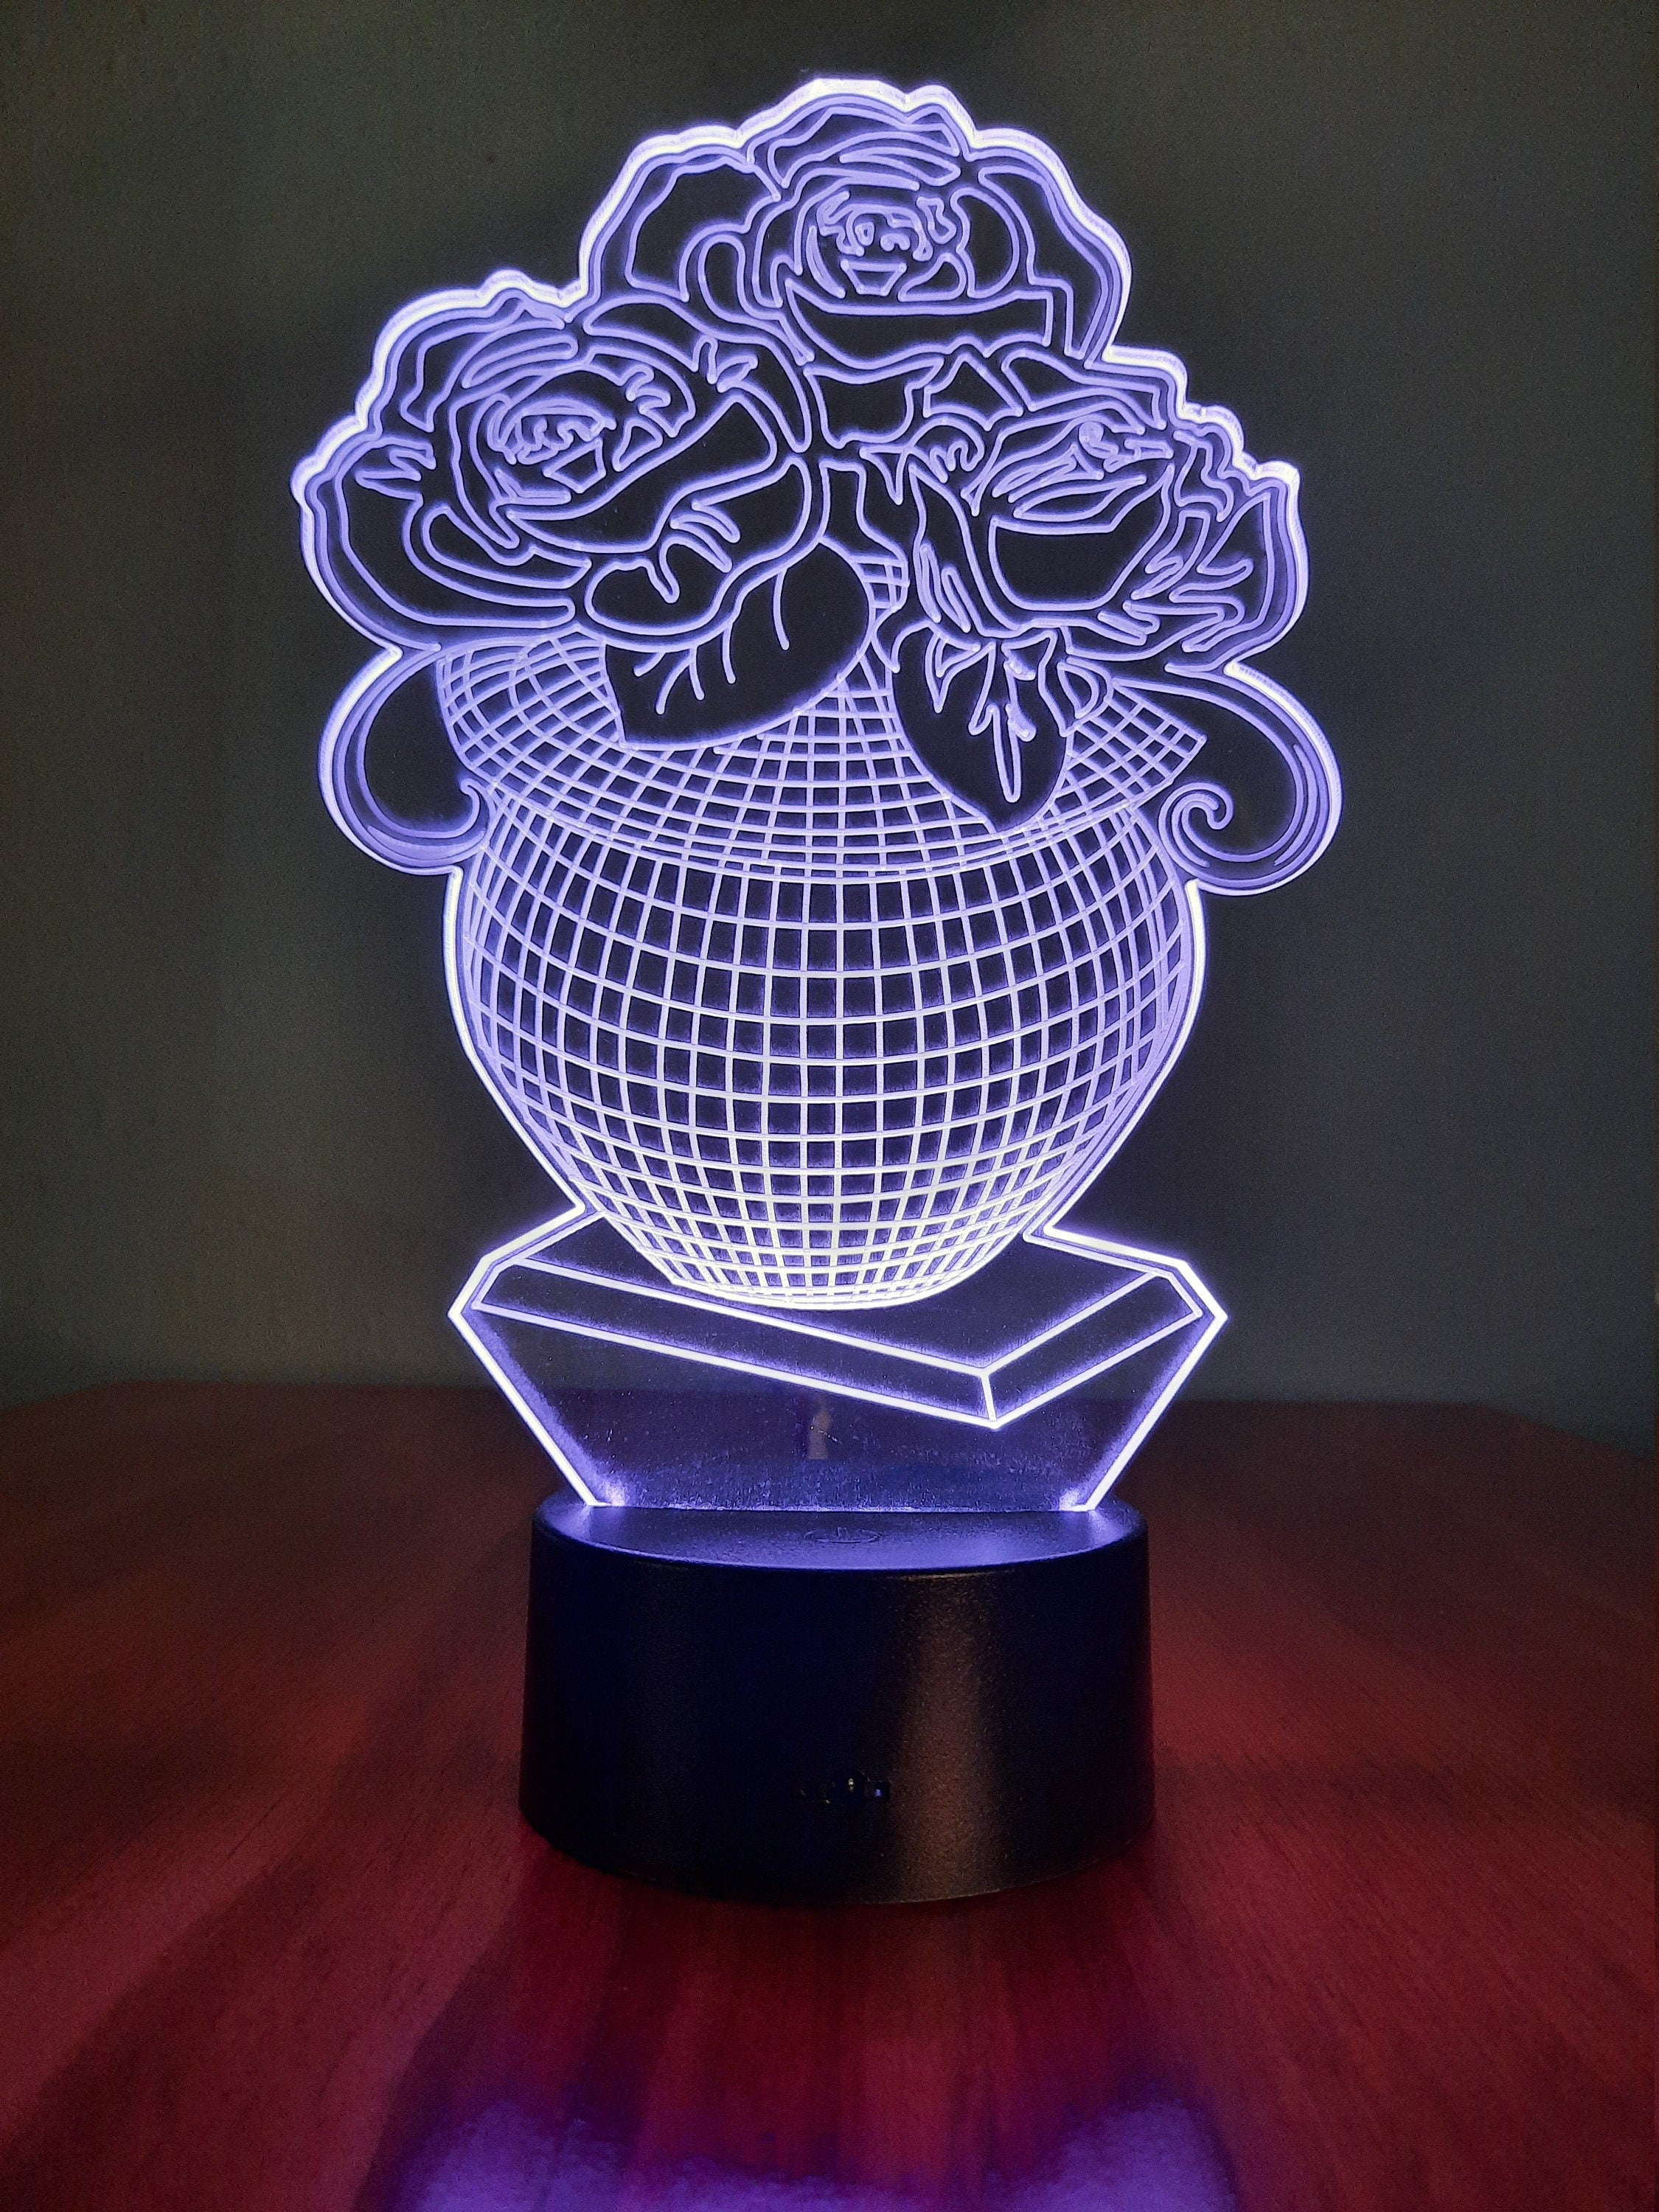 Awesome "Vase of Roses" 3D LED Lamp (1140) - FREE SHIPPING!